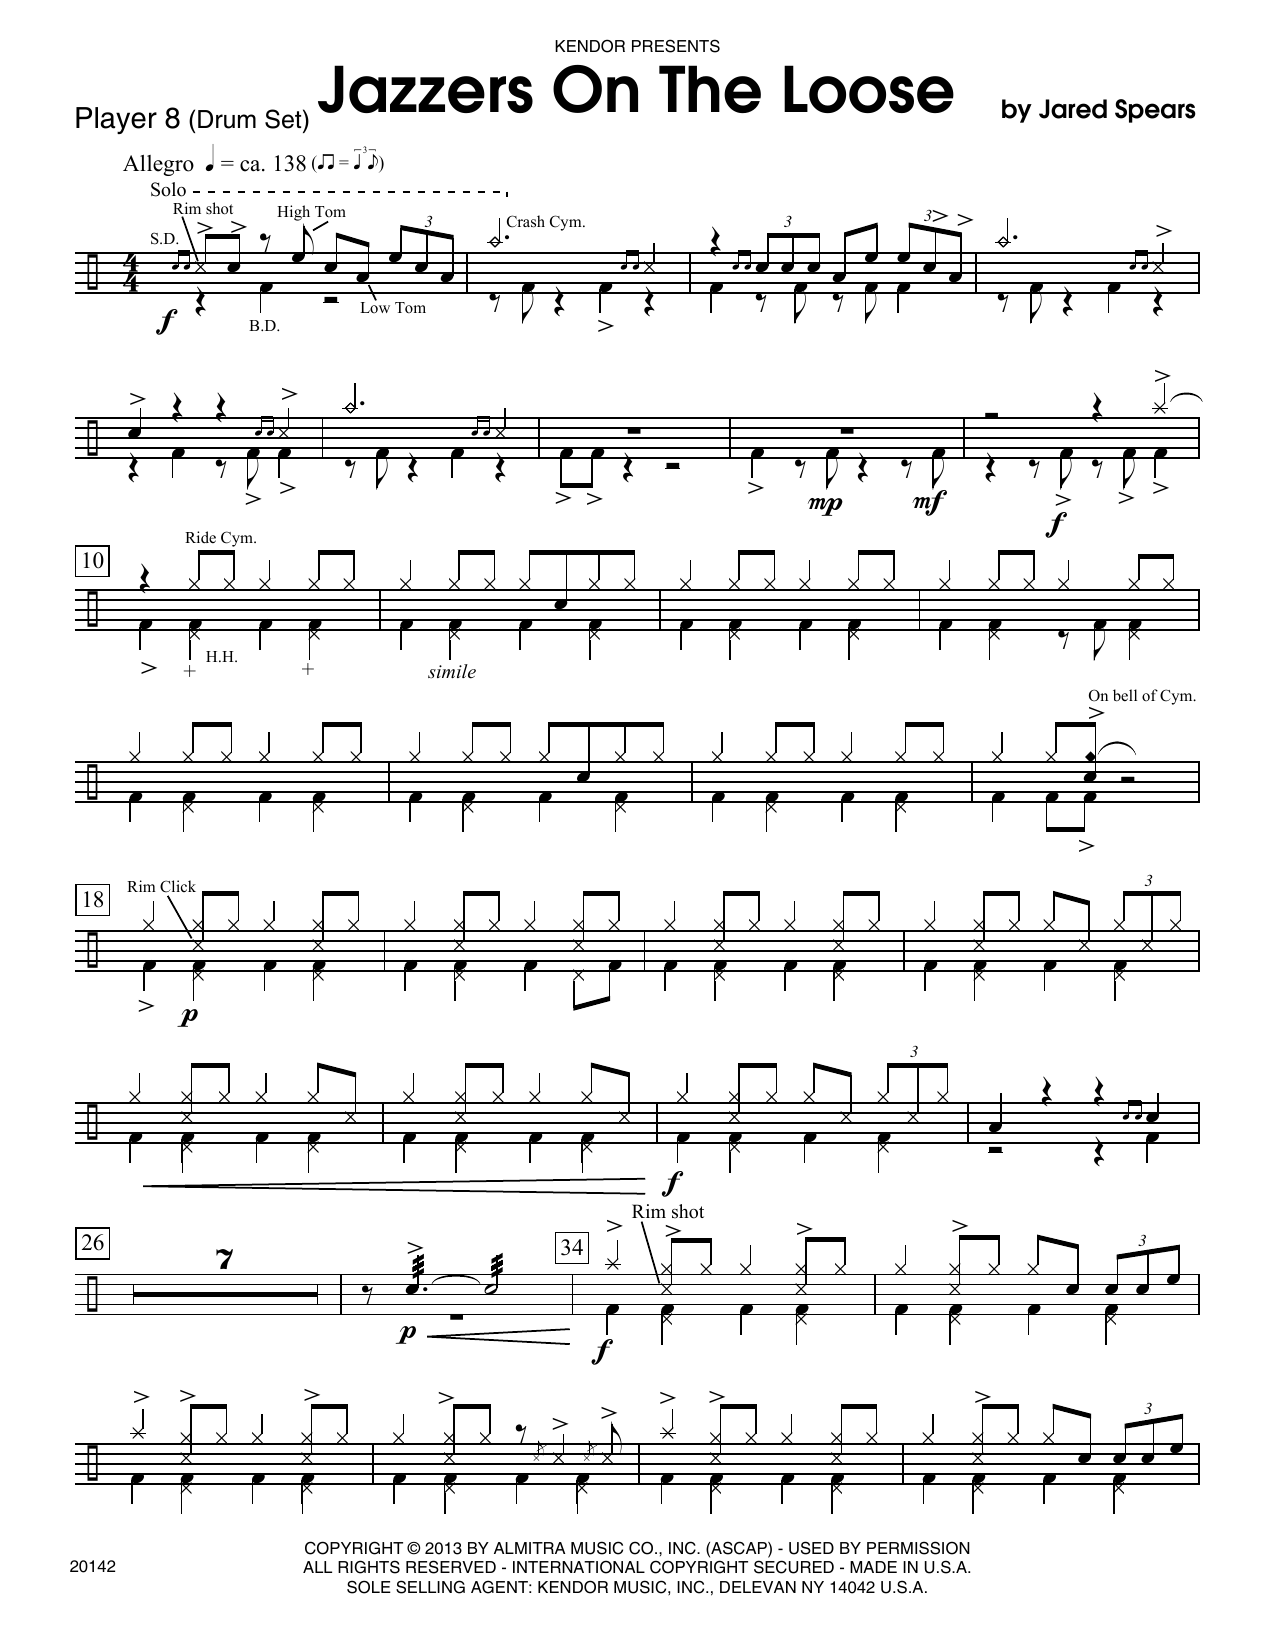 Download Jared Spears Jazzers On The Loose - Drum Set Sheet Music